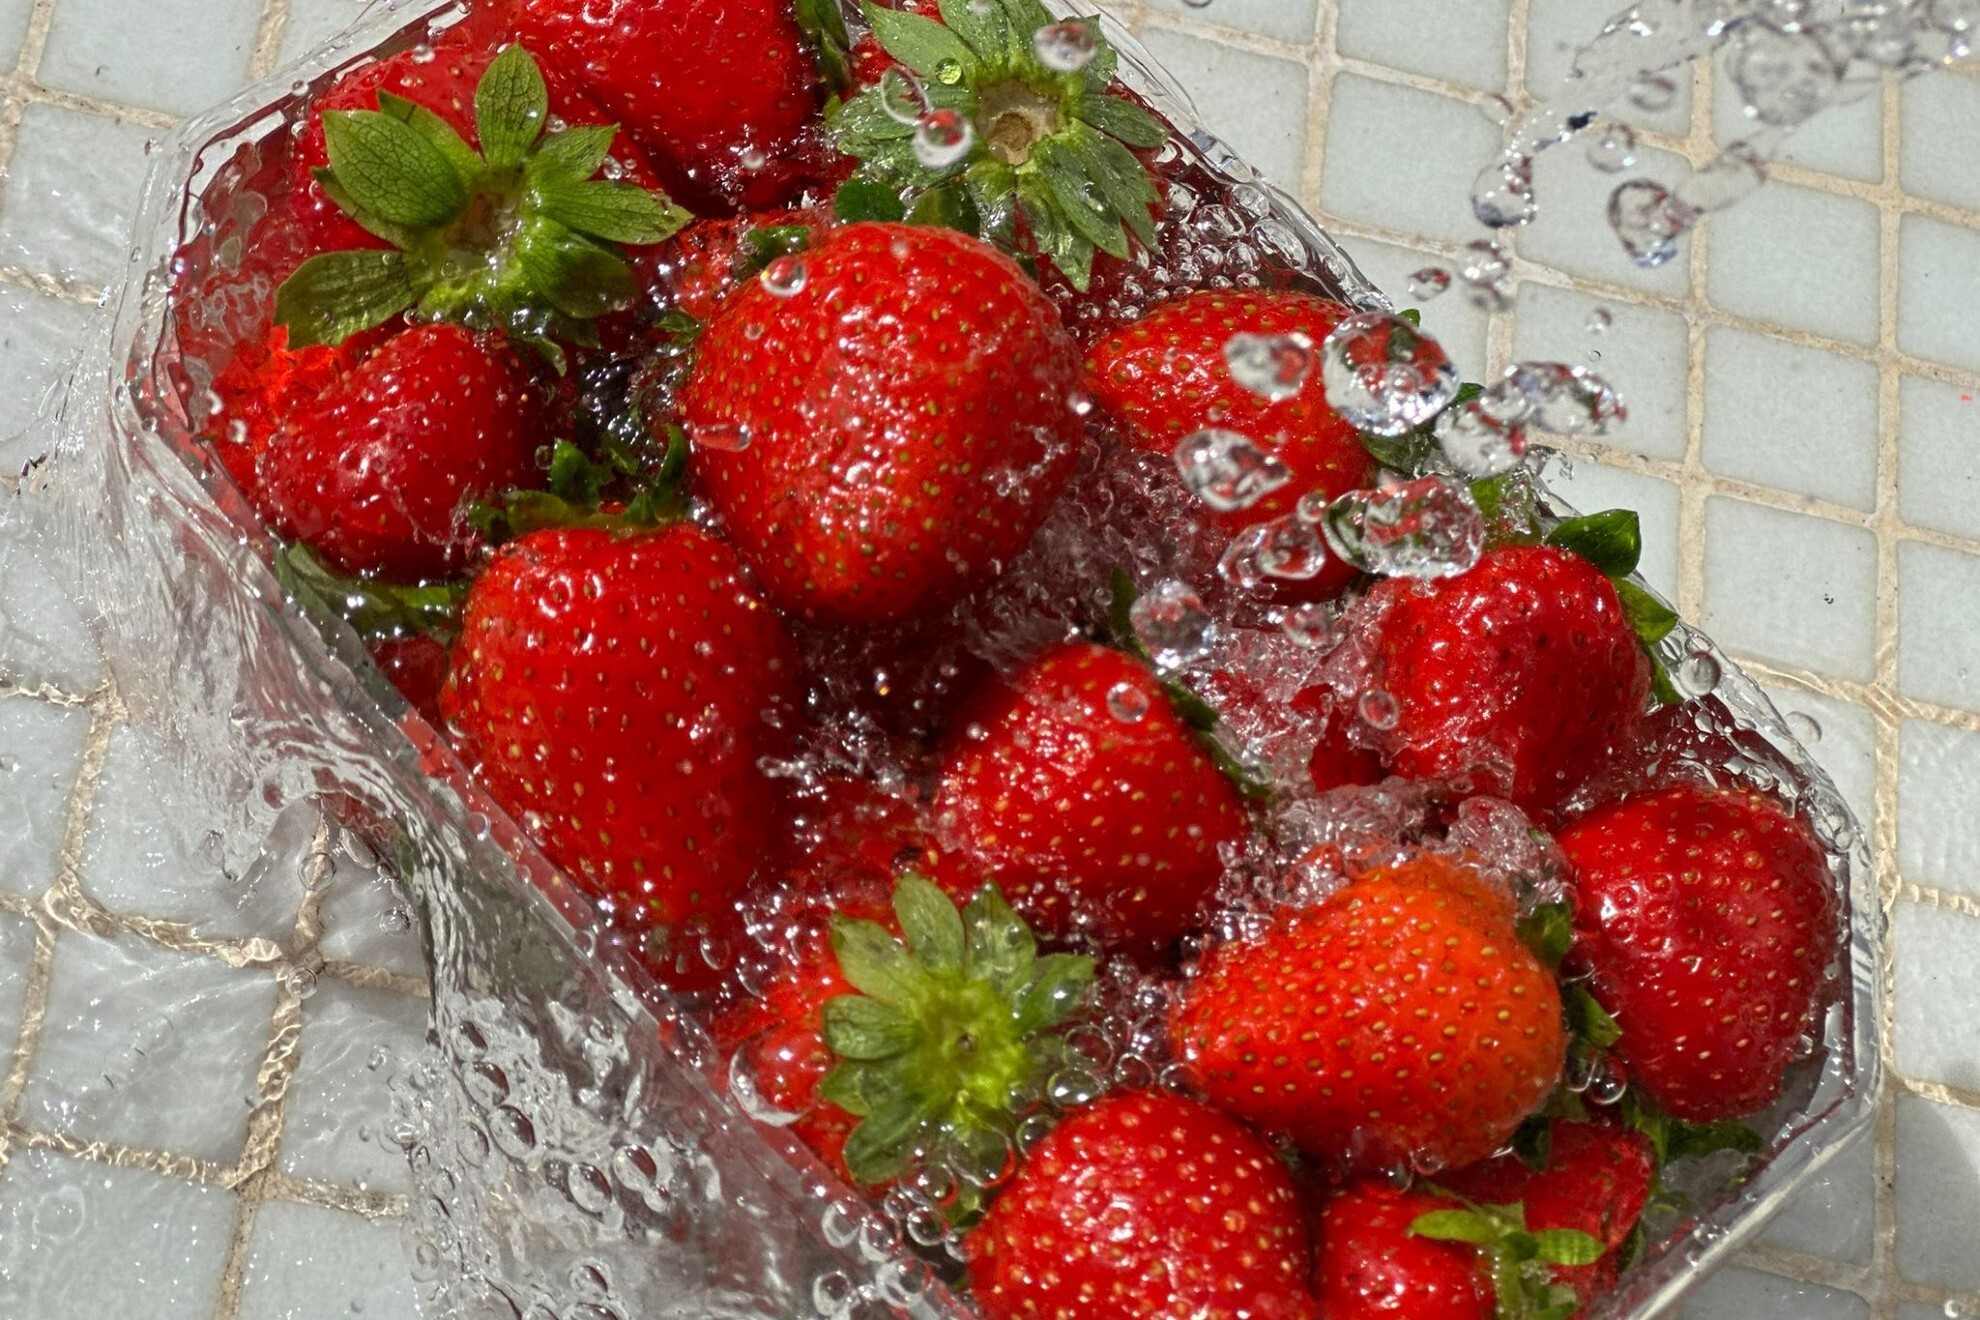 Strawberries play a significant role in maintaining a healthy diet.